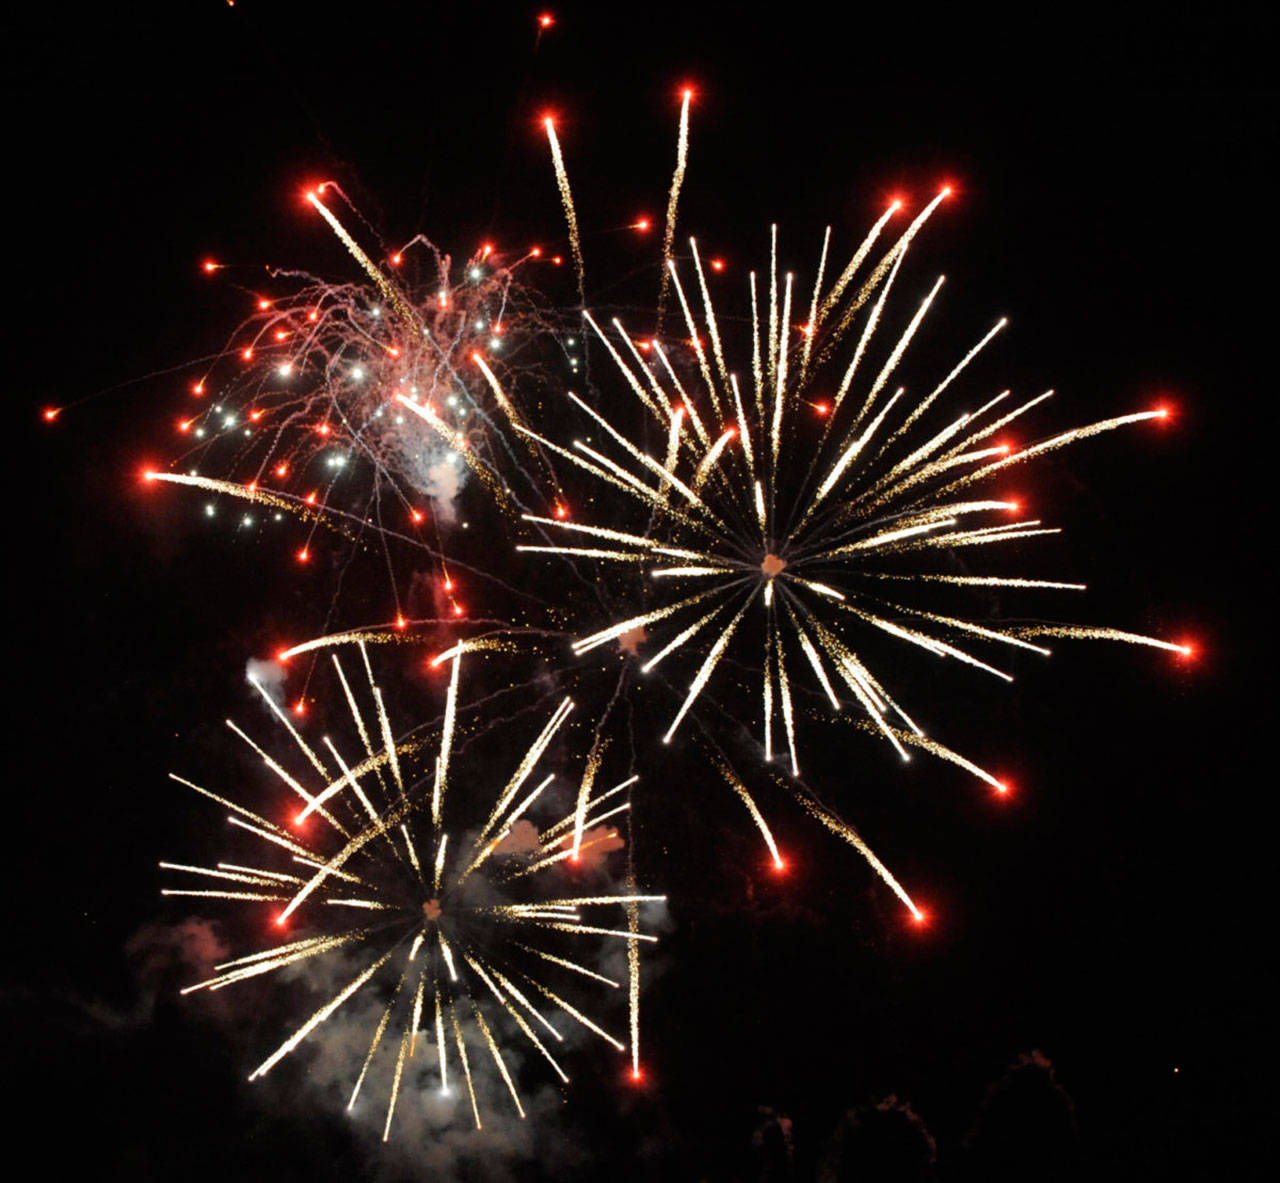 Fireworks could be coming next independence Day in Sequim depending on proposals tentatively coming to Sequim city councilors. Sequim hosts fireworks each May for the Sequim Irrigation Festival Logging Show, as seen here in 2018. (Michael Dashiell/Olympic Peninsula News Group file)